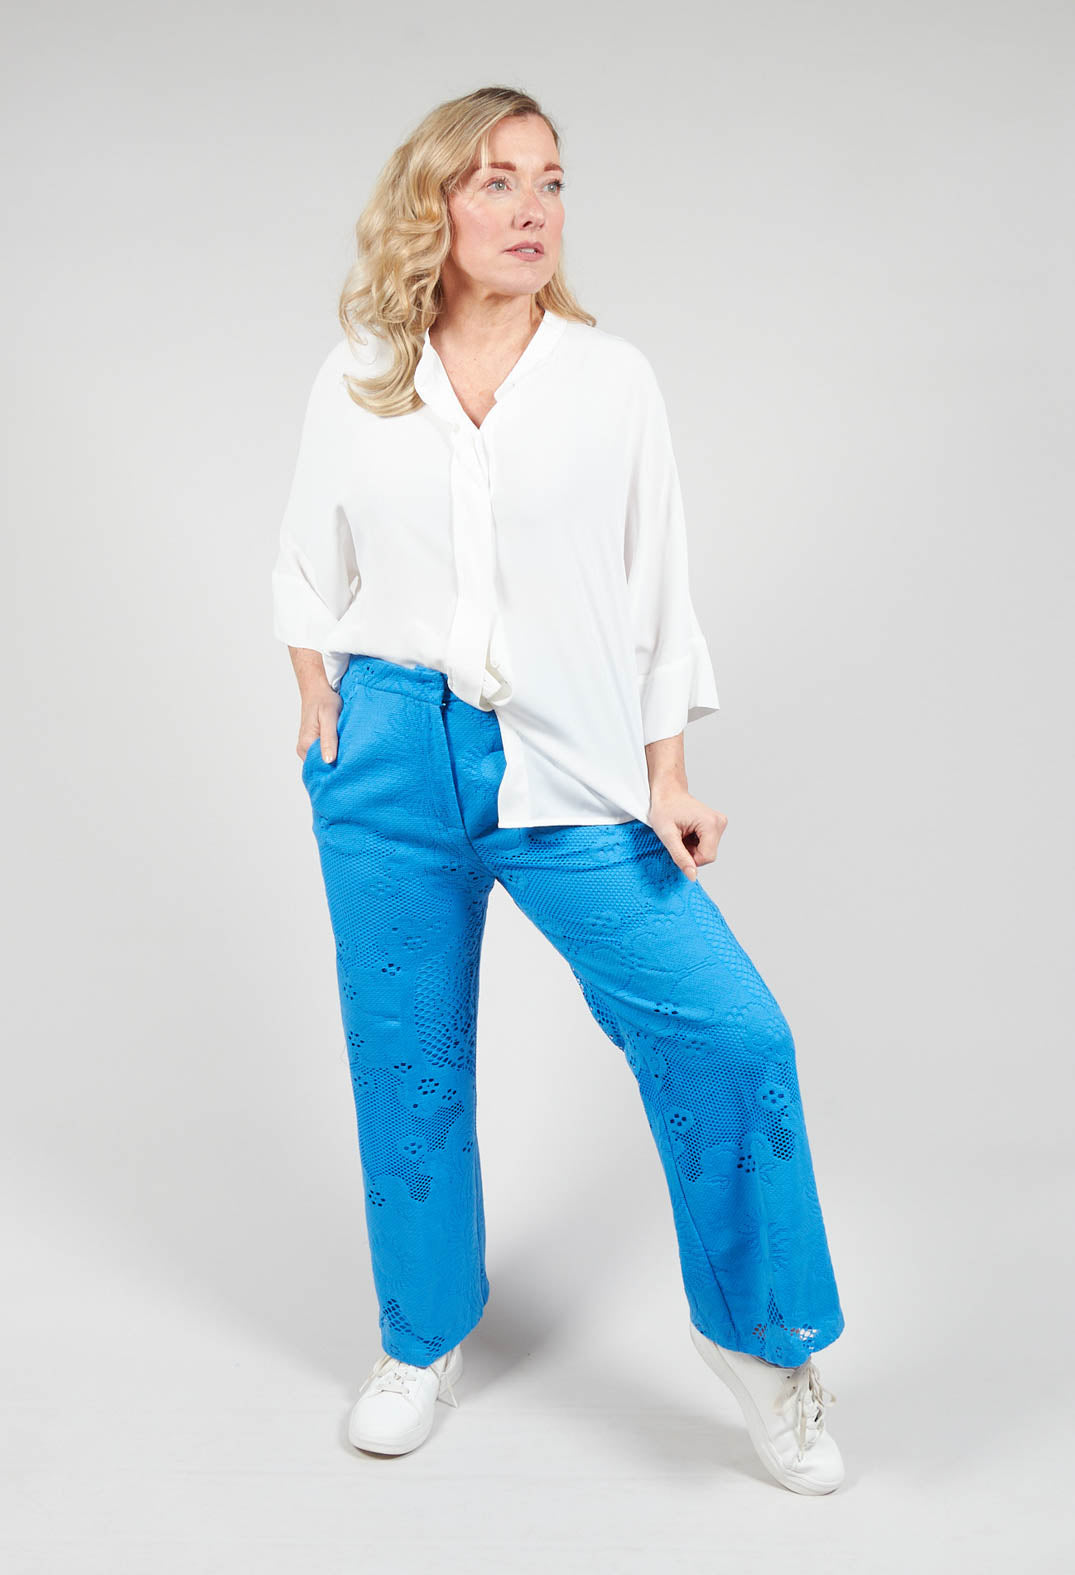 lady wearing Beatrice B straight leg trousers with lace detail in blue